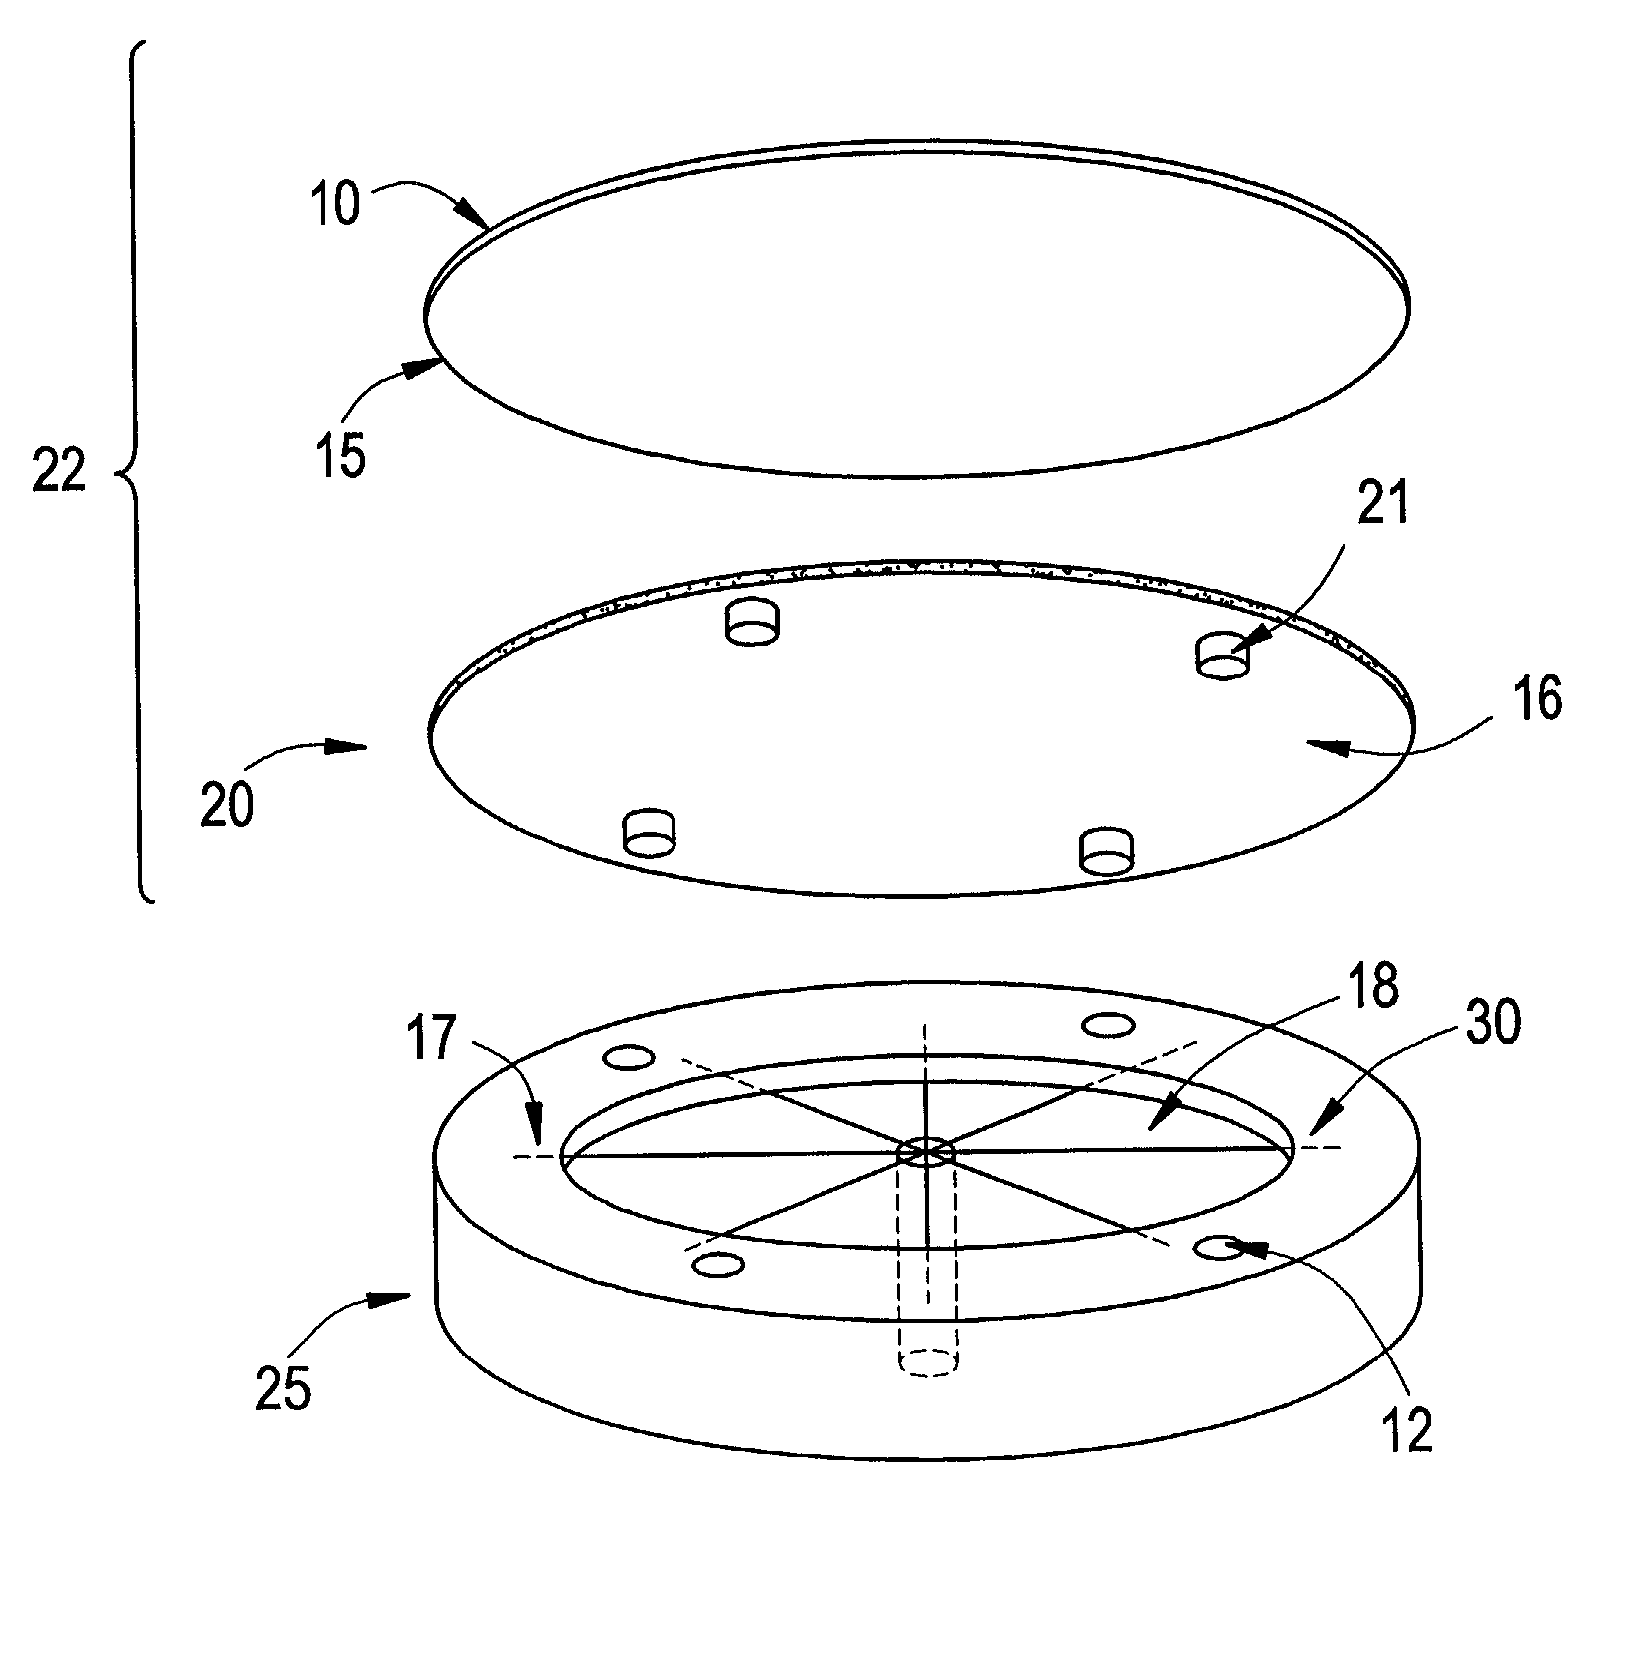 Rigid plate assembly with polishing pad and method of using